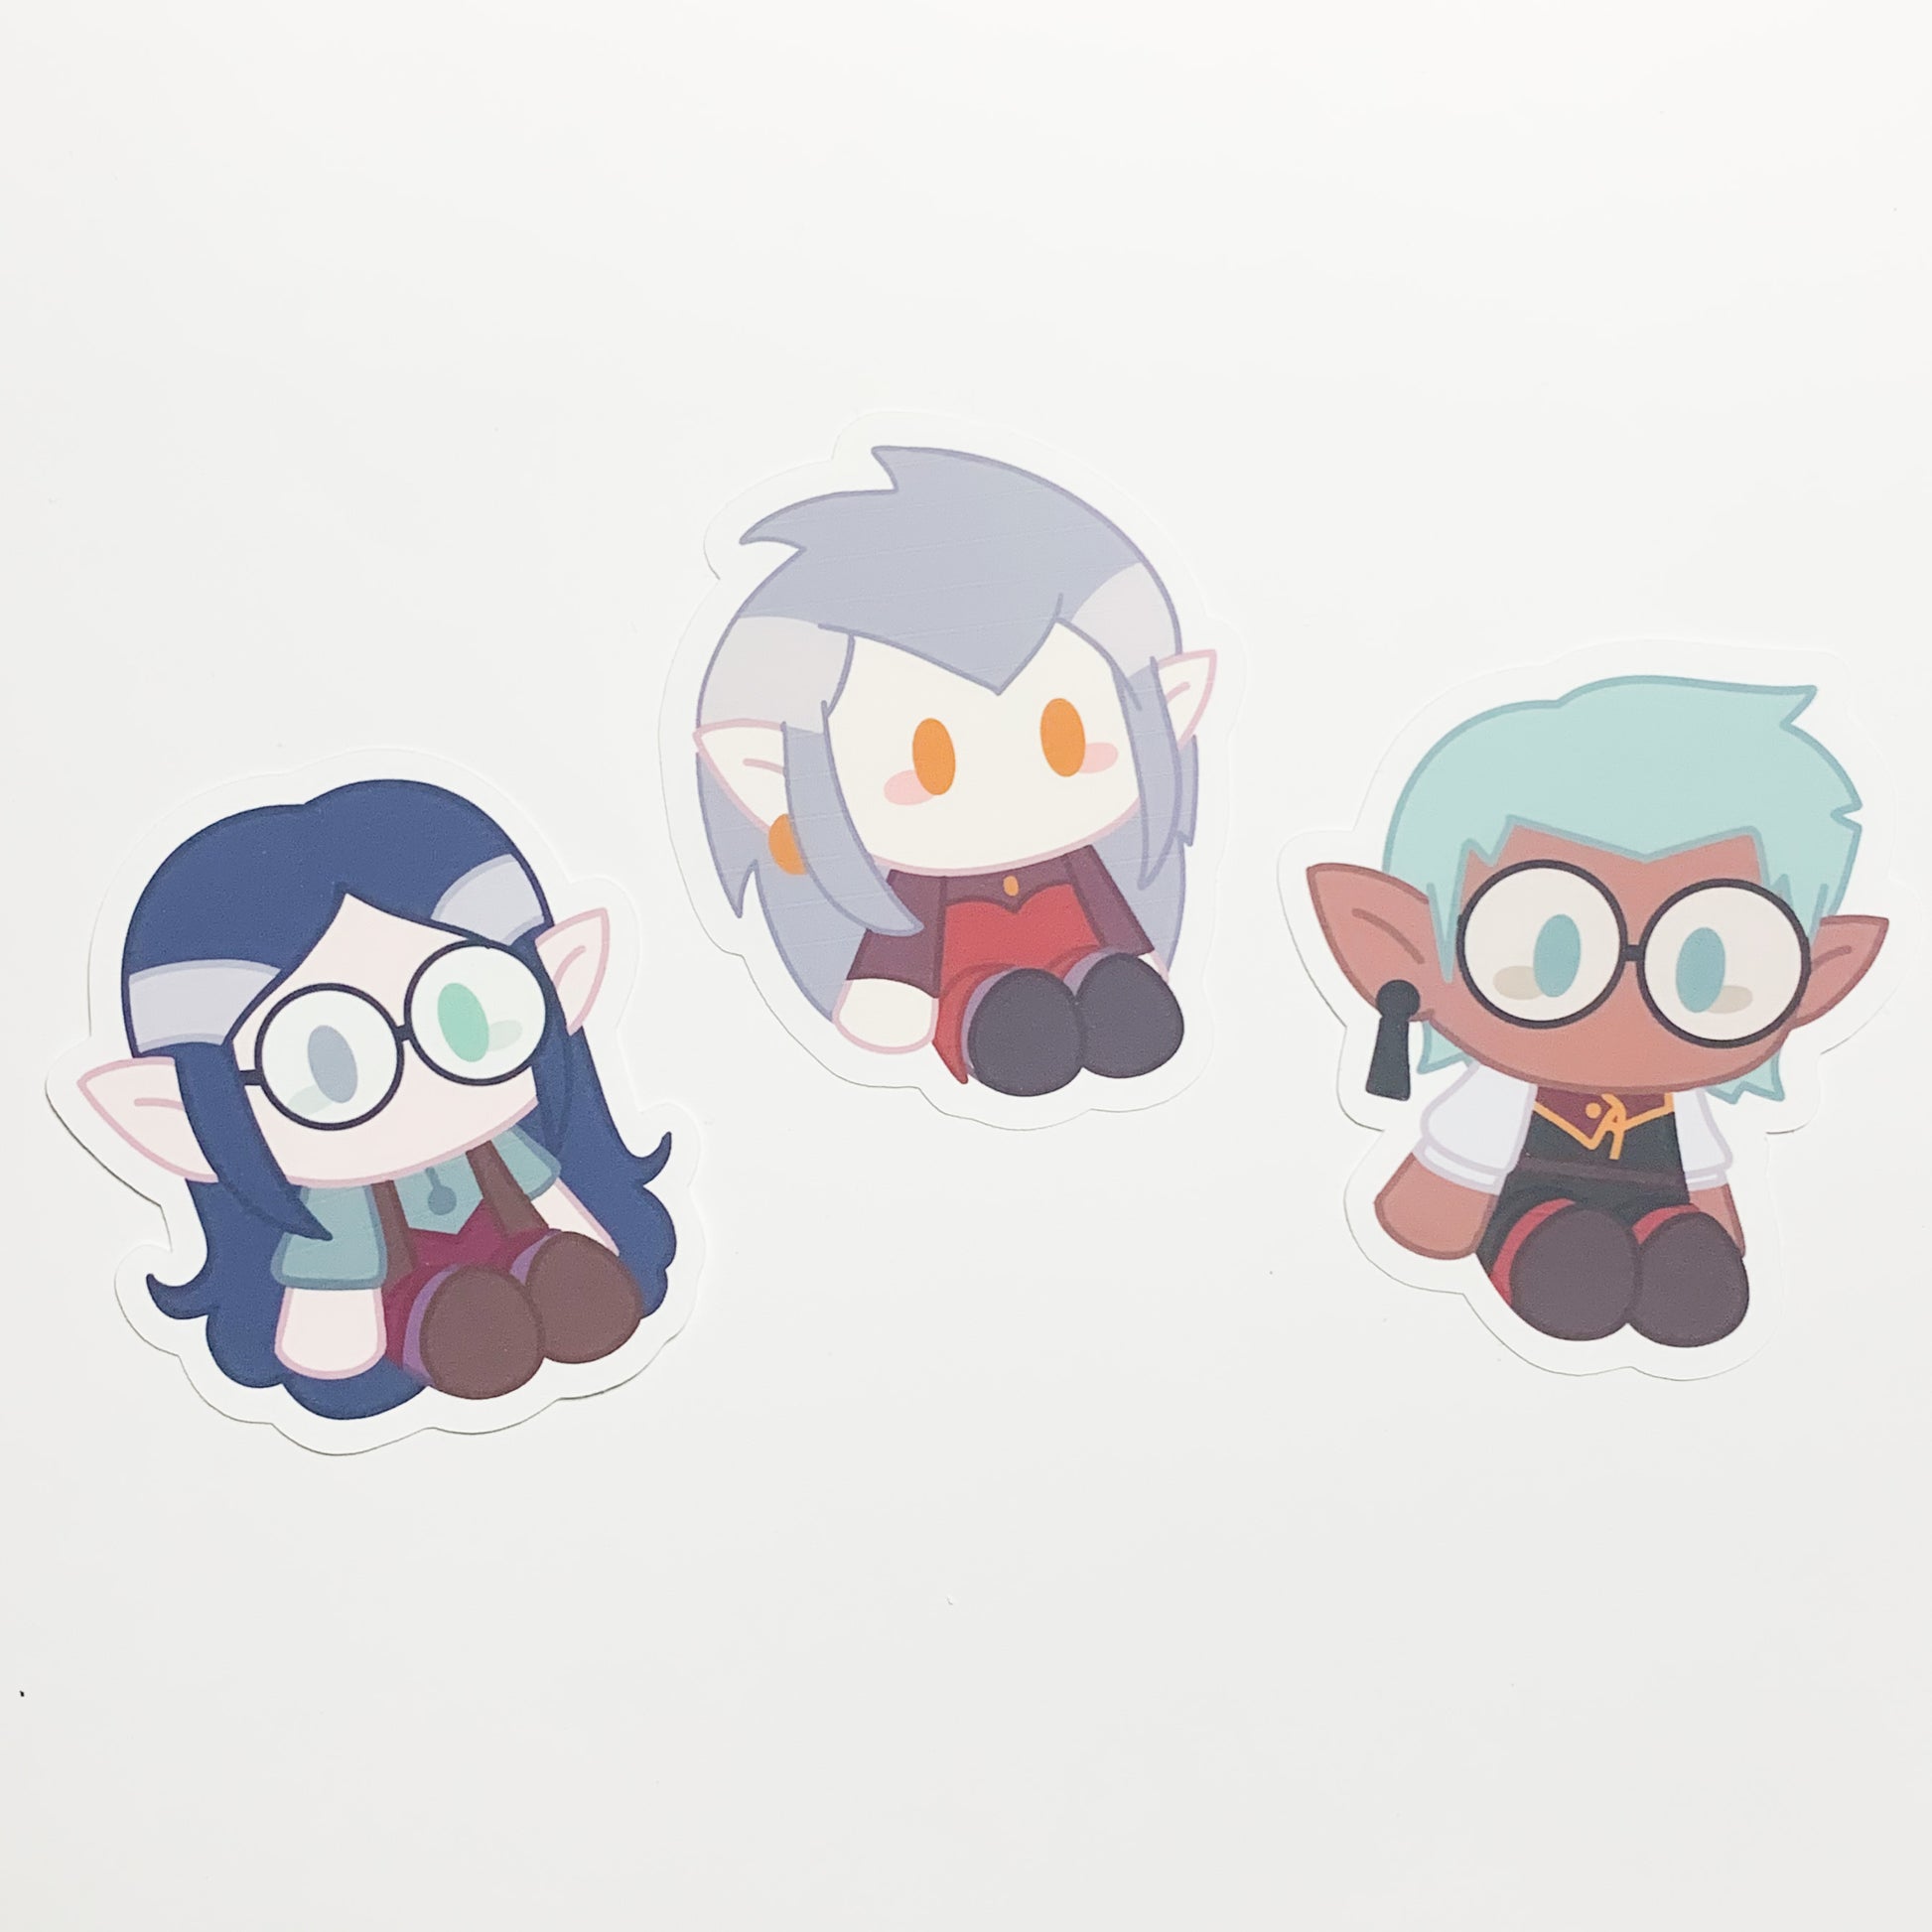 The Owl House Characters Glossy Stickers 